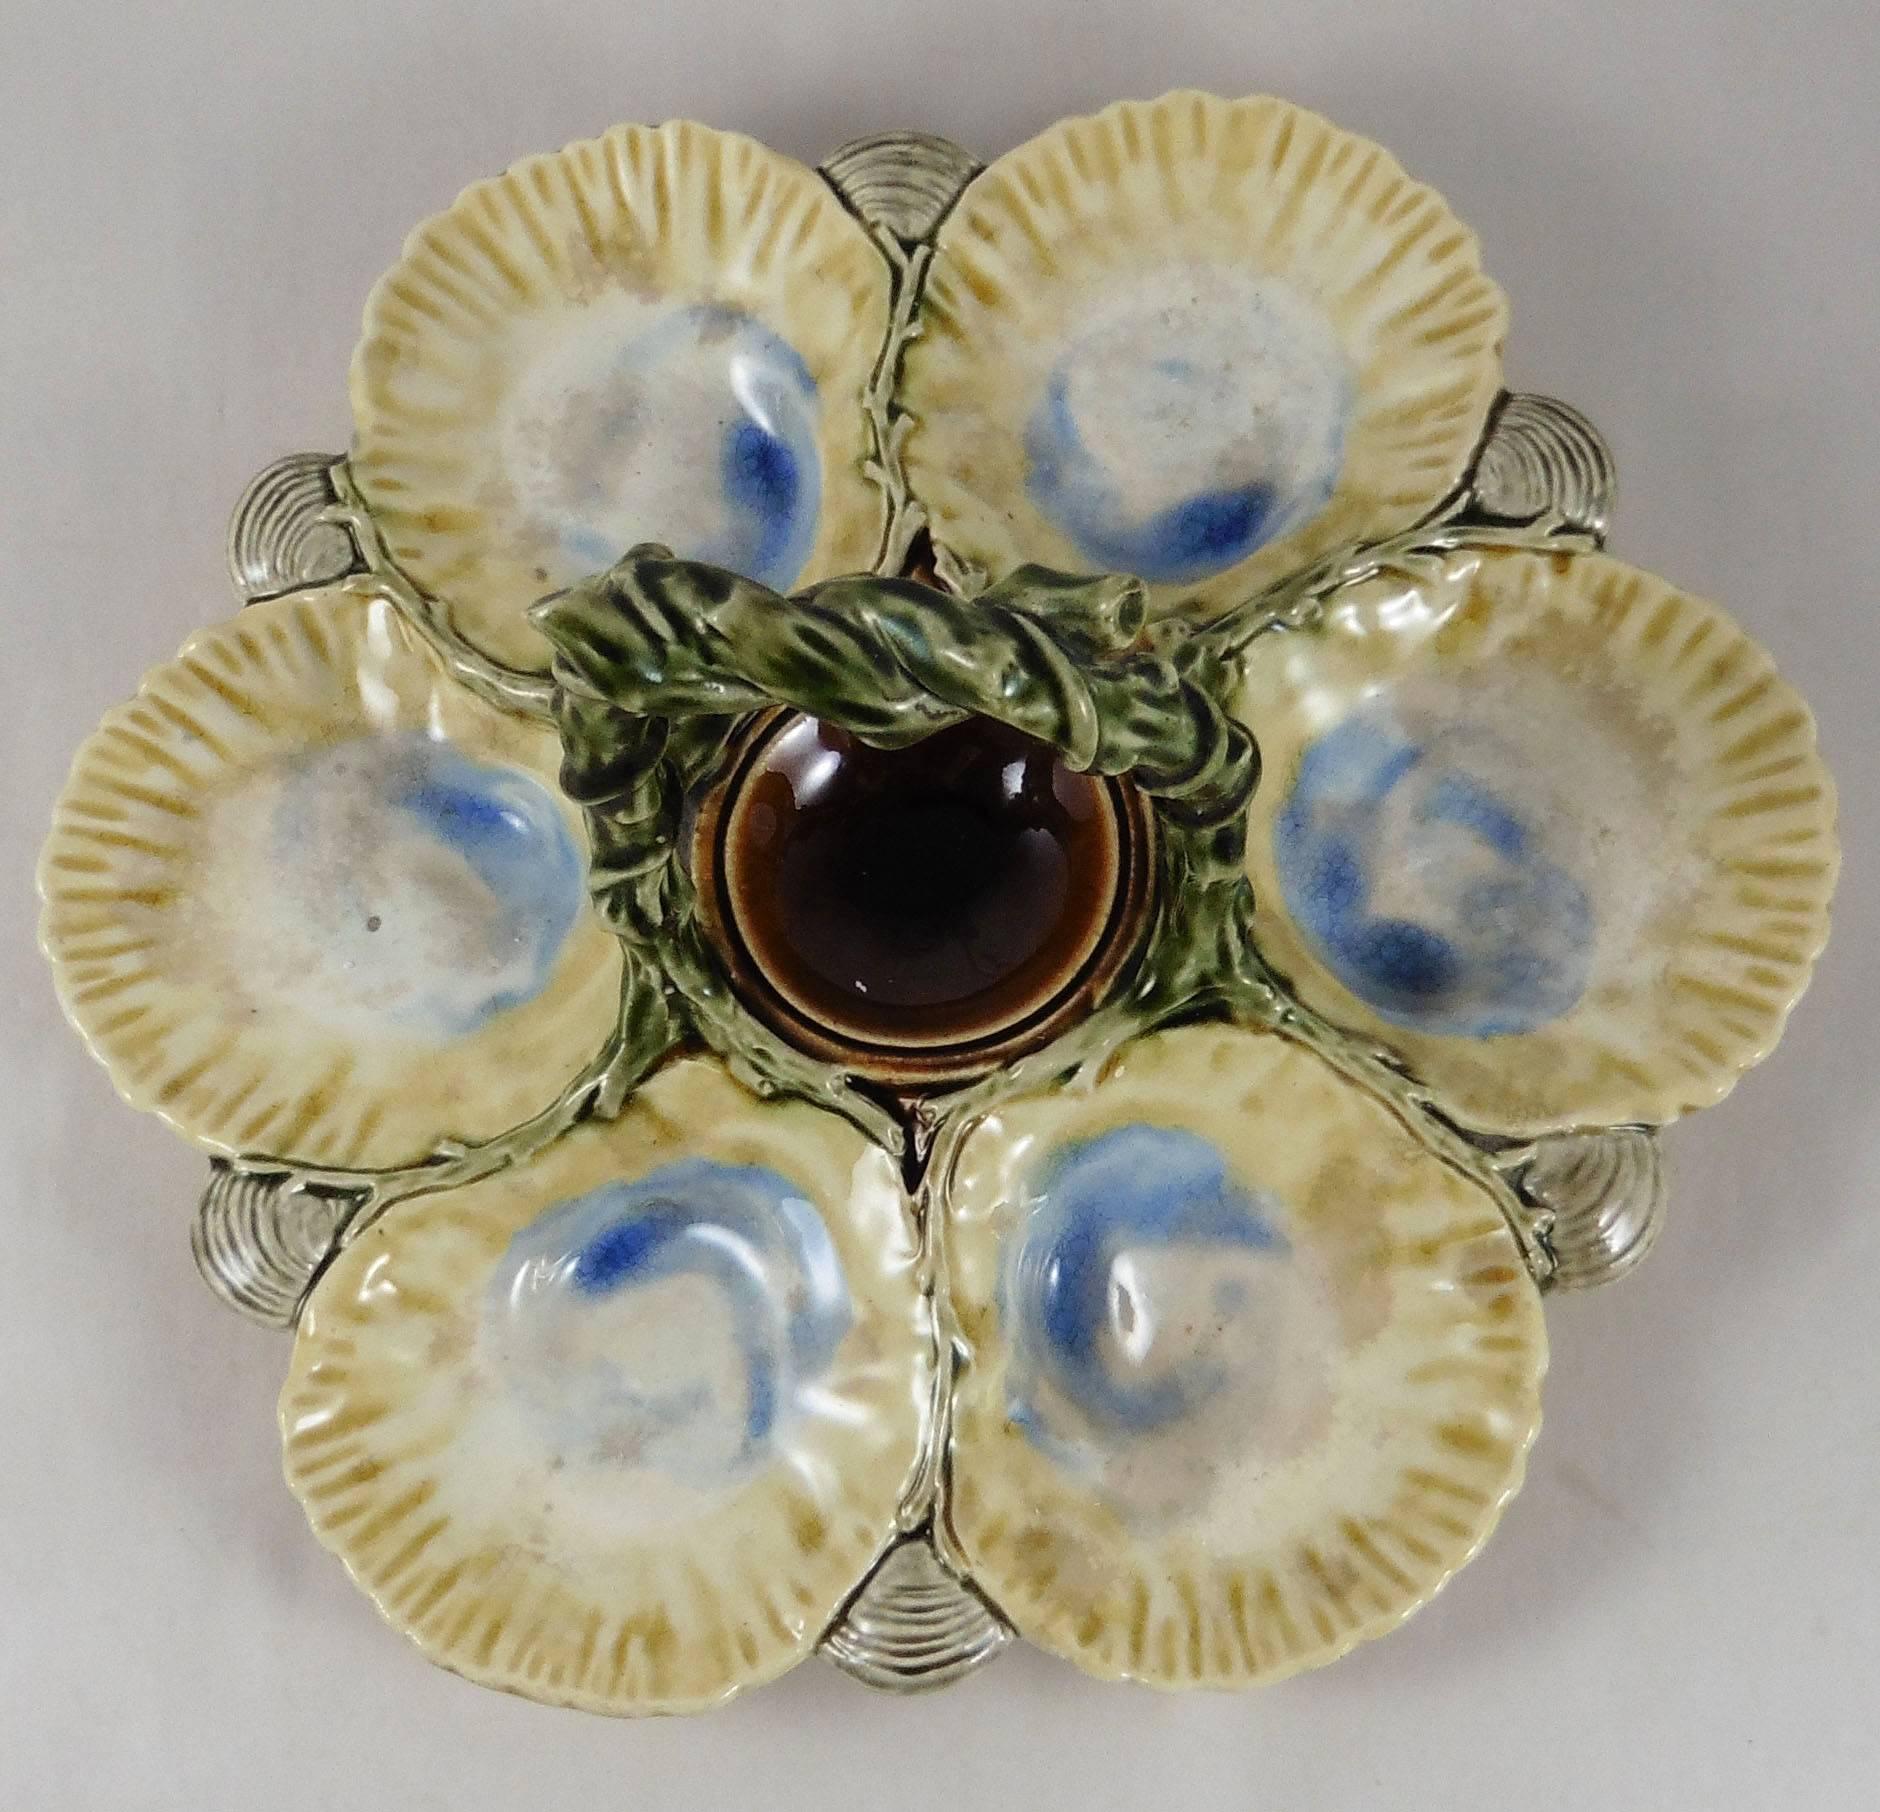 Very rare Majolica oyster basket server signed Hippolyte Boulenger Choisy Le roi, circa 1880.
The handle is a branch who form a knot on the top, between the six yellow and purple oysters shells, small grey shells, the center of the platter is the